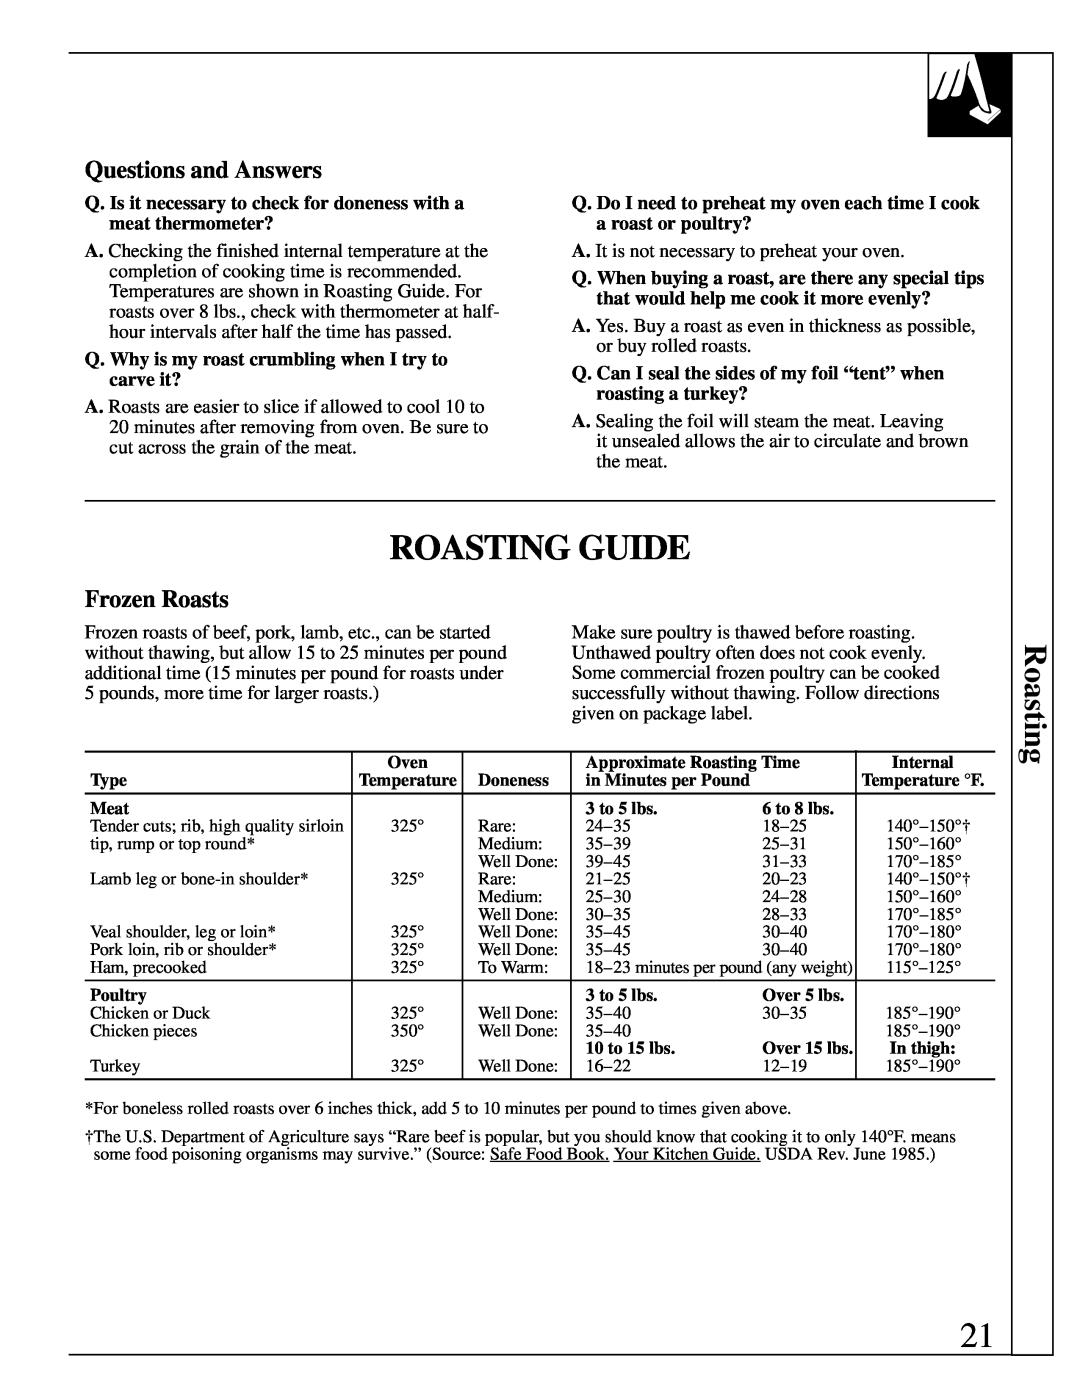 GE XL44 Roasting Guide, Questions and Answers, Frozen Roasts, Q. Why is my roast crumbling when I try to carve it? 